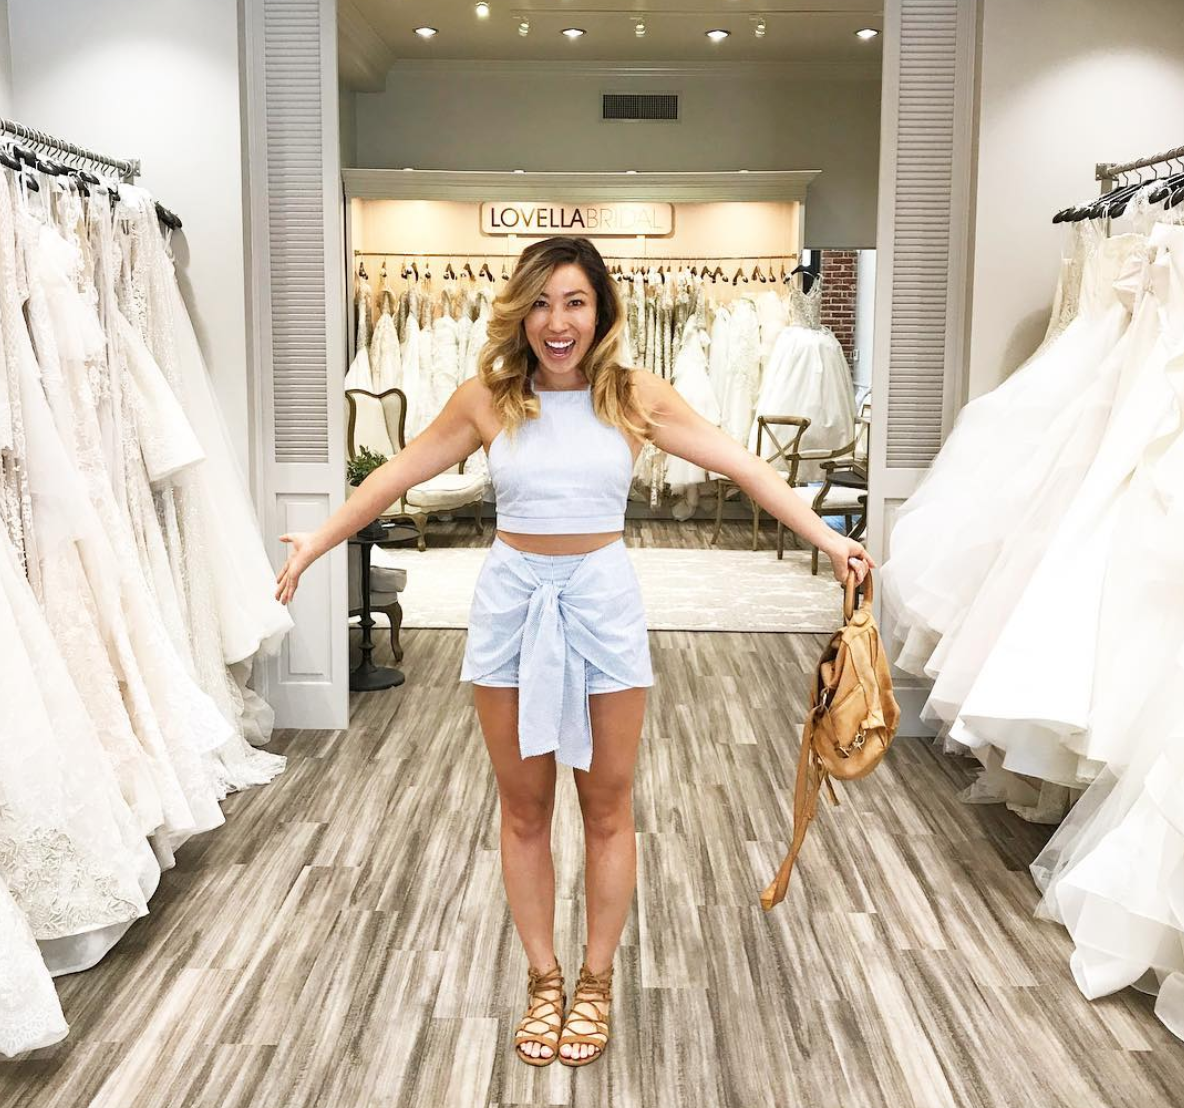 Fitness instructor Cassey Ho is accused of body shaming brides. (Photo: Instagram/Blogilates)